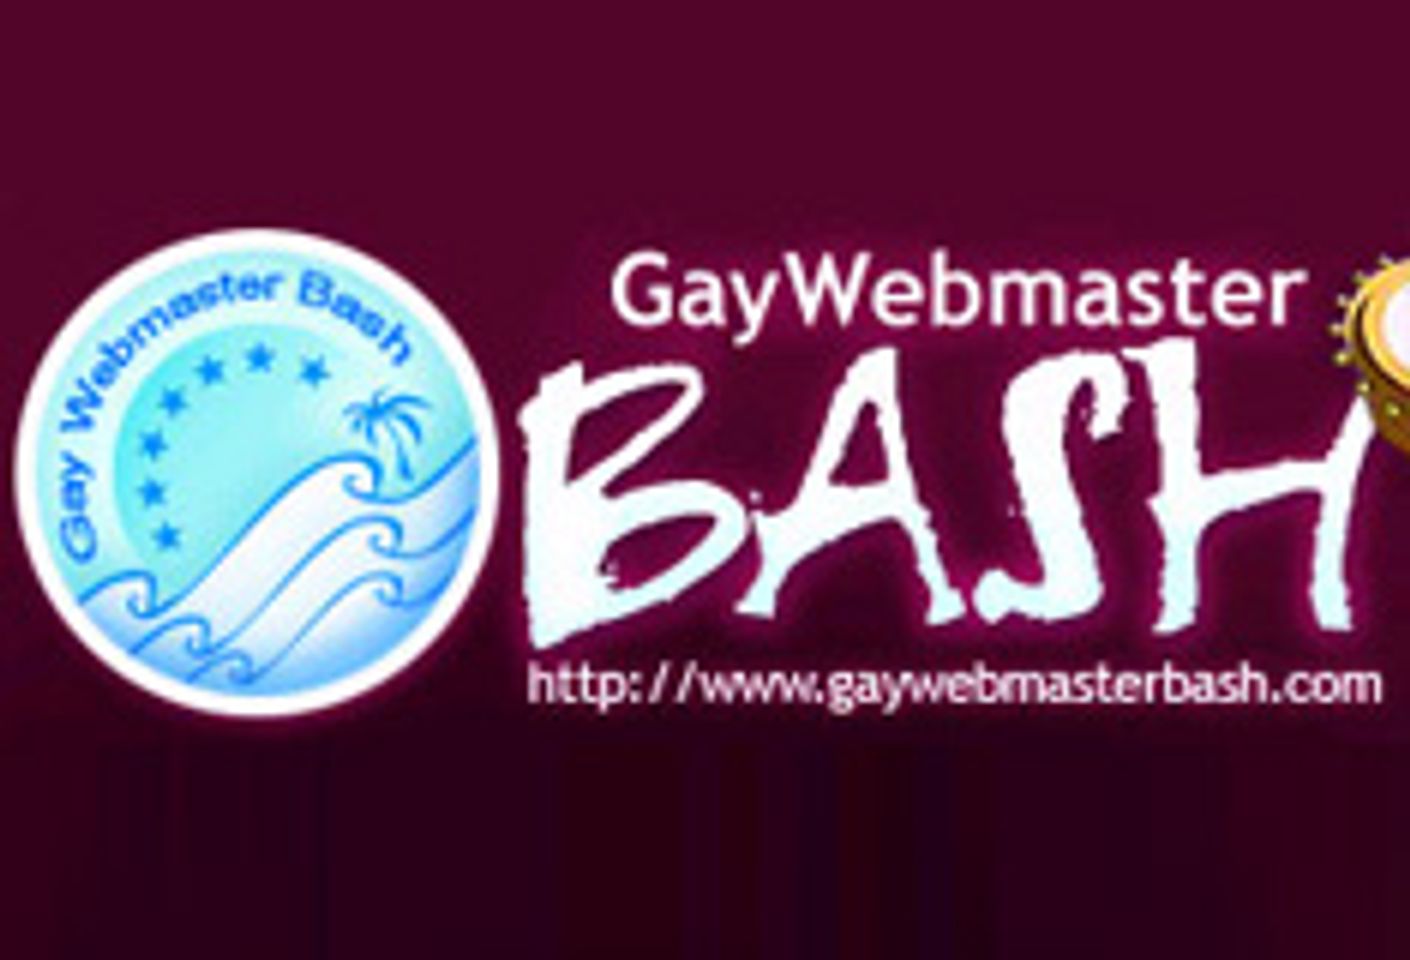 Gay Webmaster Bash Launches Web Site